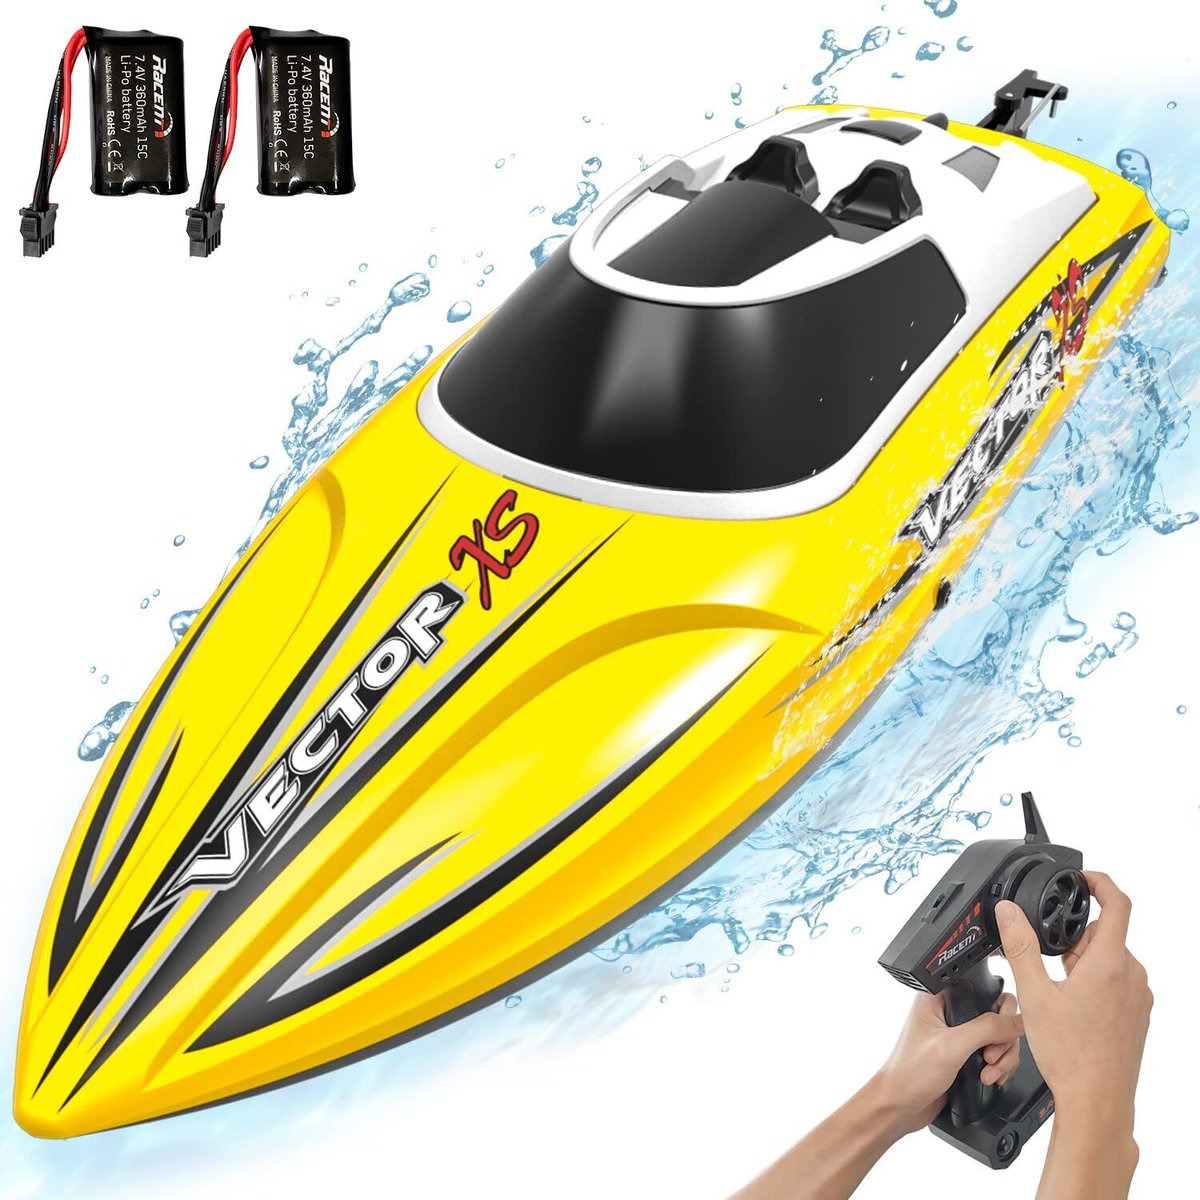 VOLANTEXRC Vector XS Remote Control Outdoor Electric Racing Boat -- 45% off! -- JUST $45.99

ebay.to/43l6XQk

#rcboat #rcboats #rcboatdeals #rcboatdeal #electricboat #electricboats #remotecontrol #remotecontrolboat #remotecontrolboats #rc #rccars #toydeals #toydeal #toys